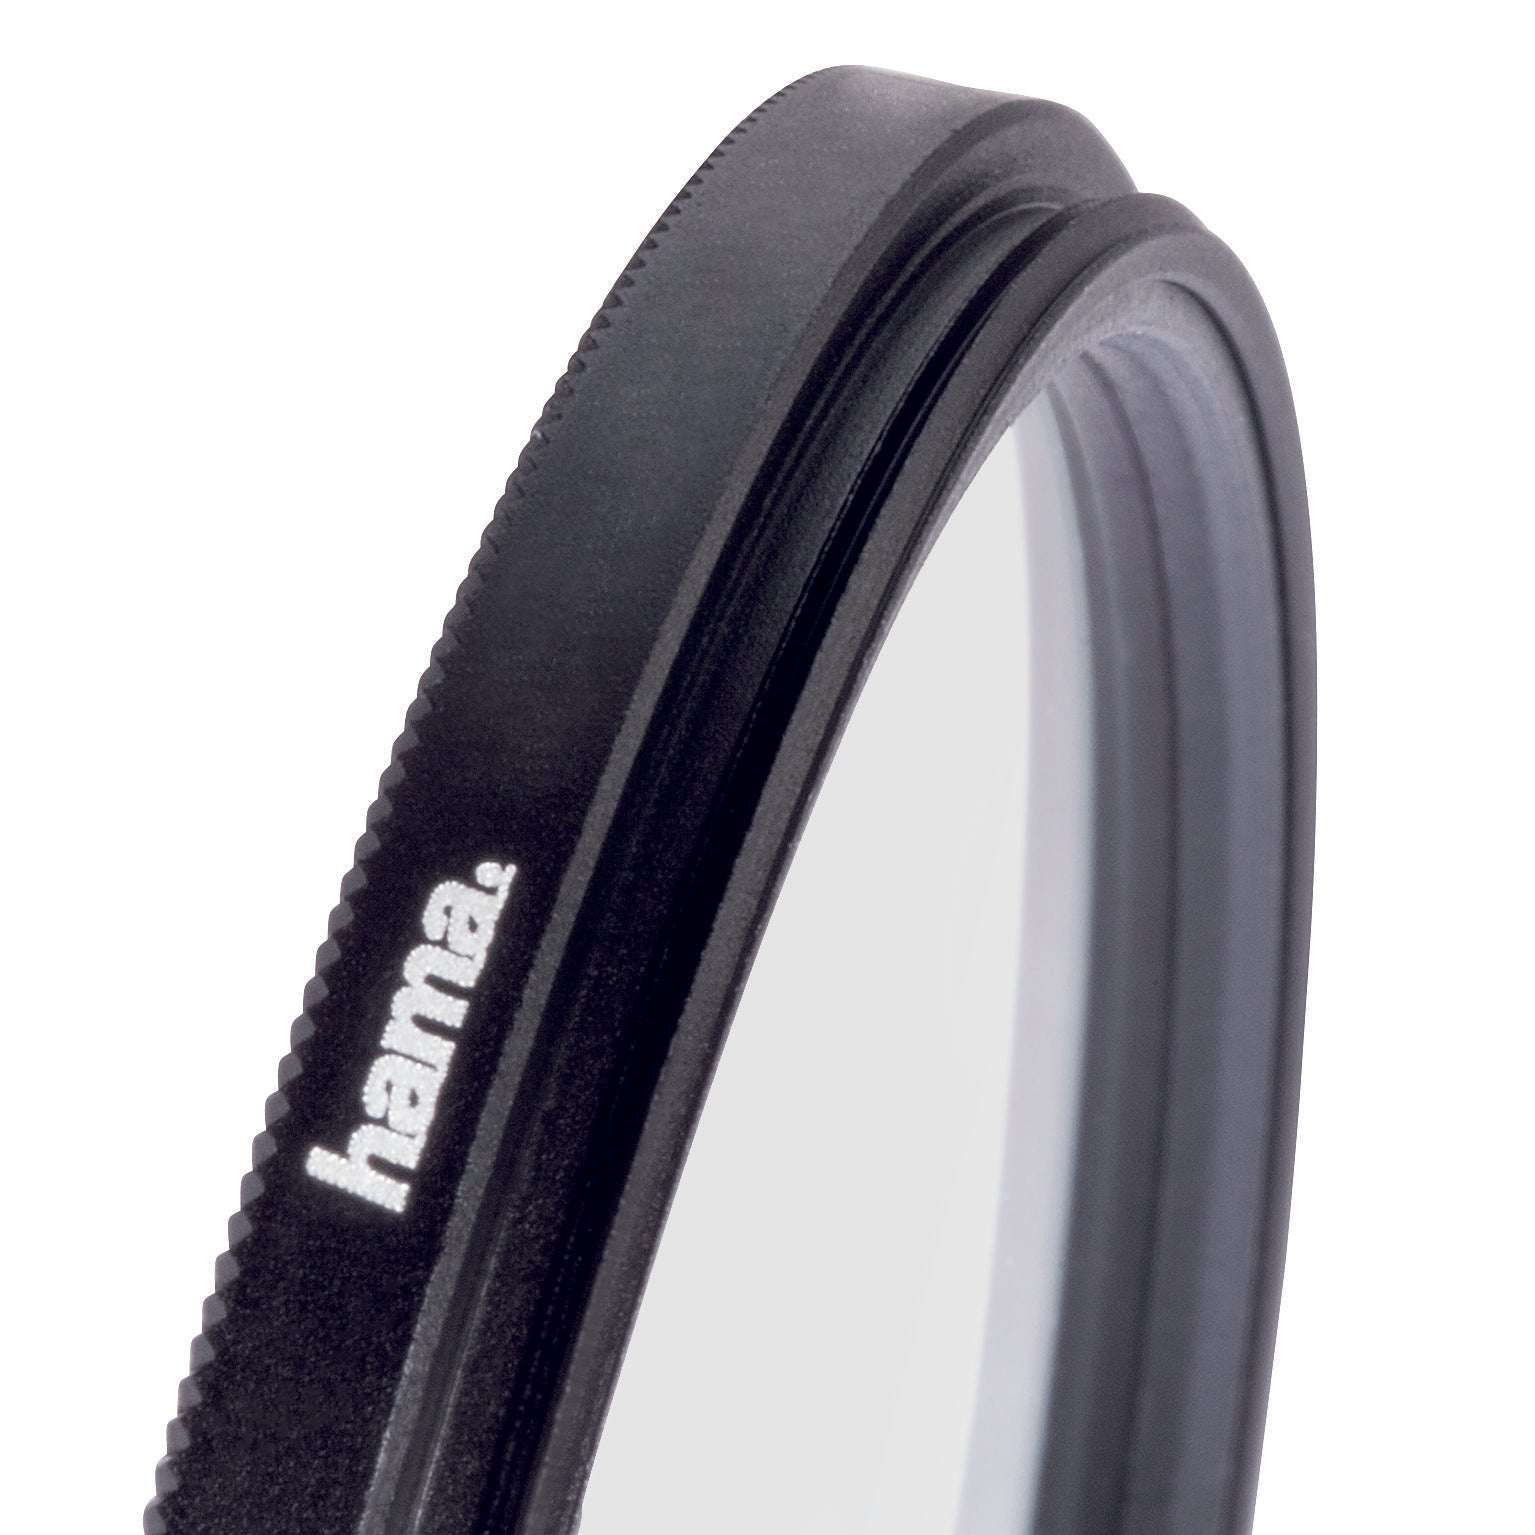 UV Filter, coated, 55.0 mm-Accessories-HAMA-computerspace